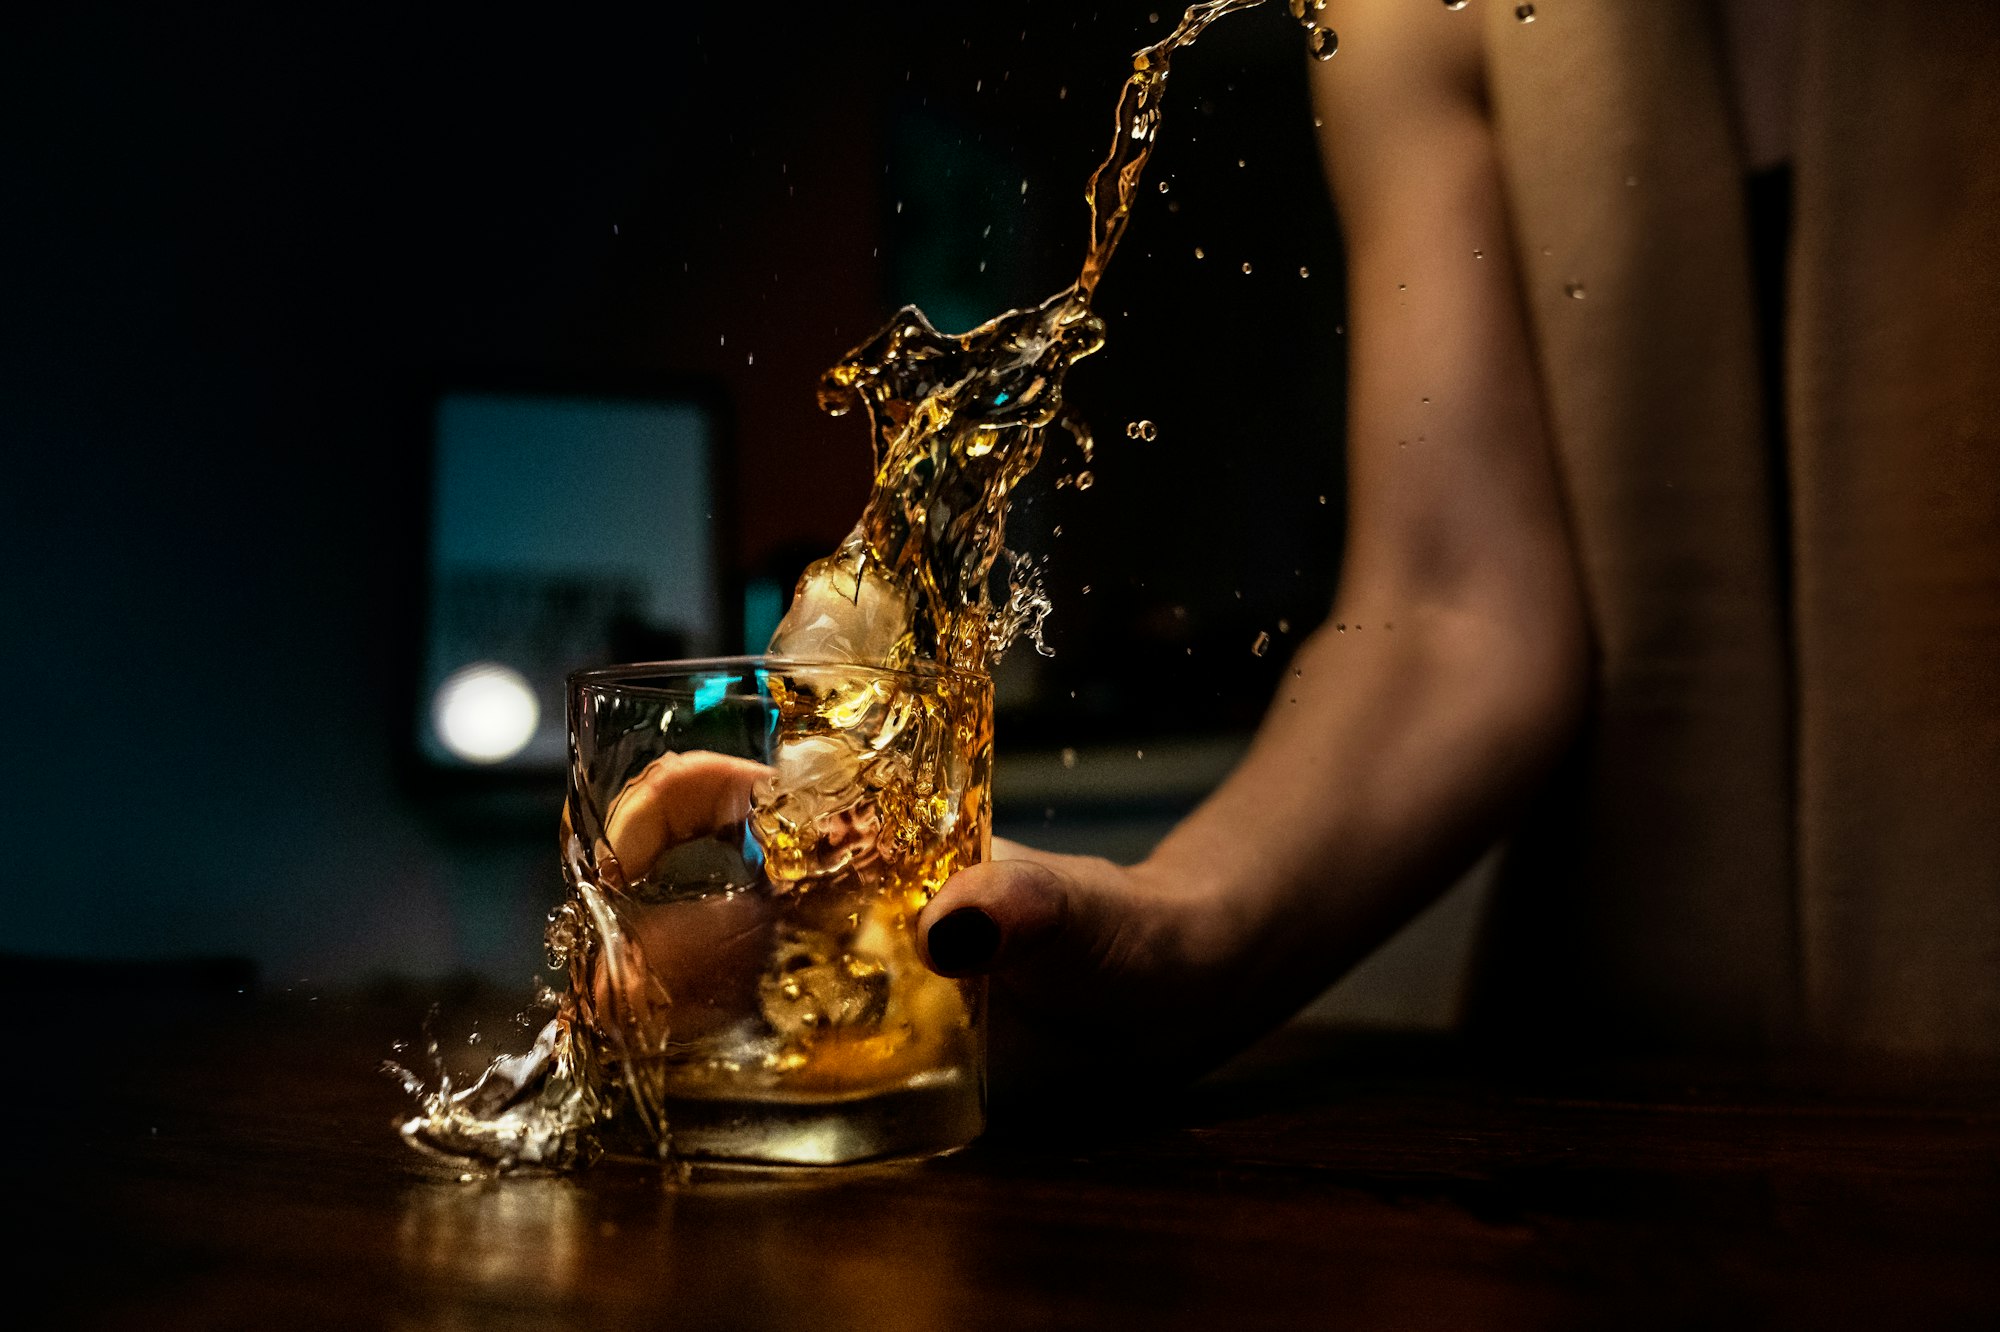 Drinking alcohol can lower your inhibitions and make you feel more relaxed.